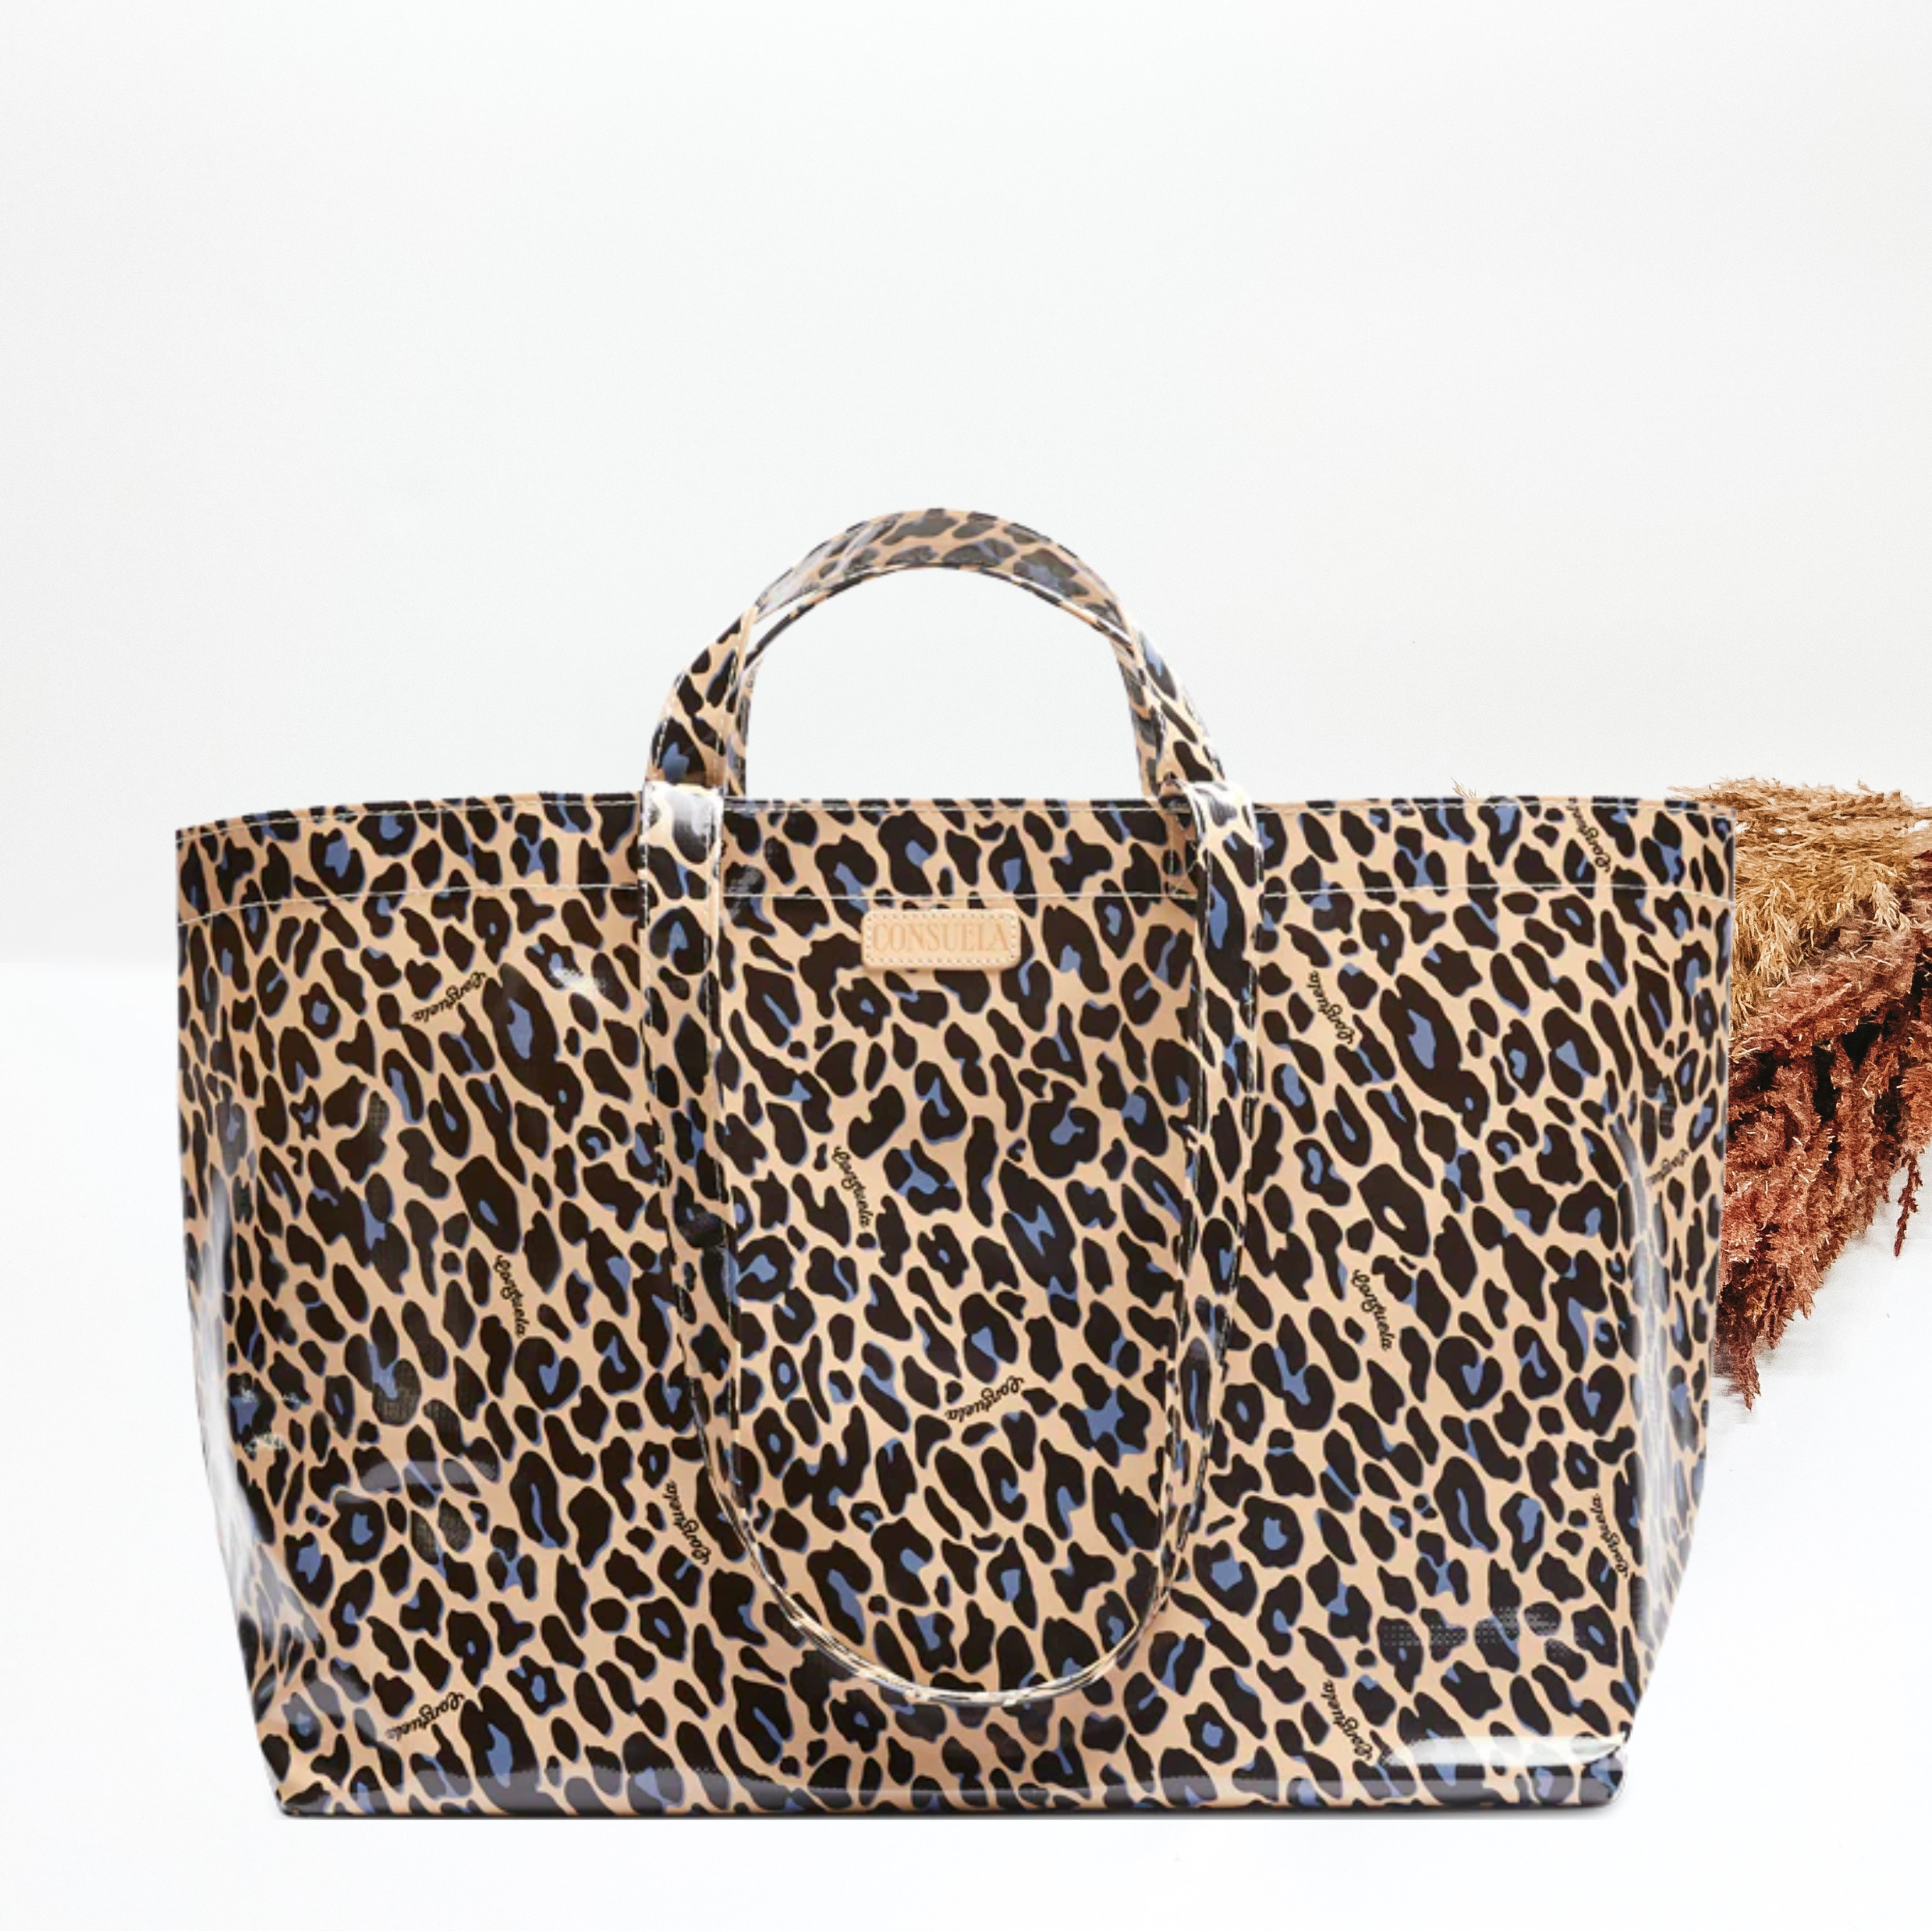 Large rectangle tote with short handles and long handles. This bag is tan in color with a black and blue leopard print. This tote is pictured in front of pompous grass on a white background.